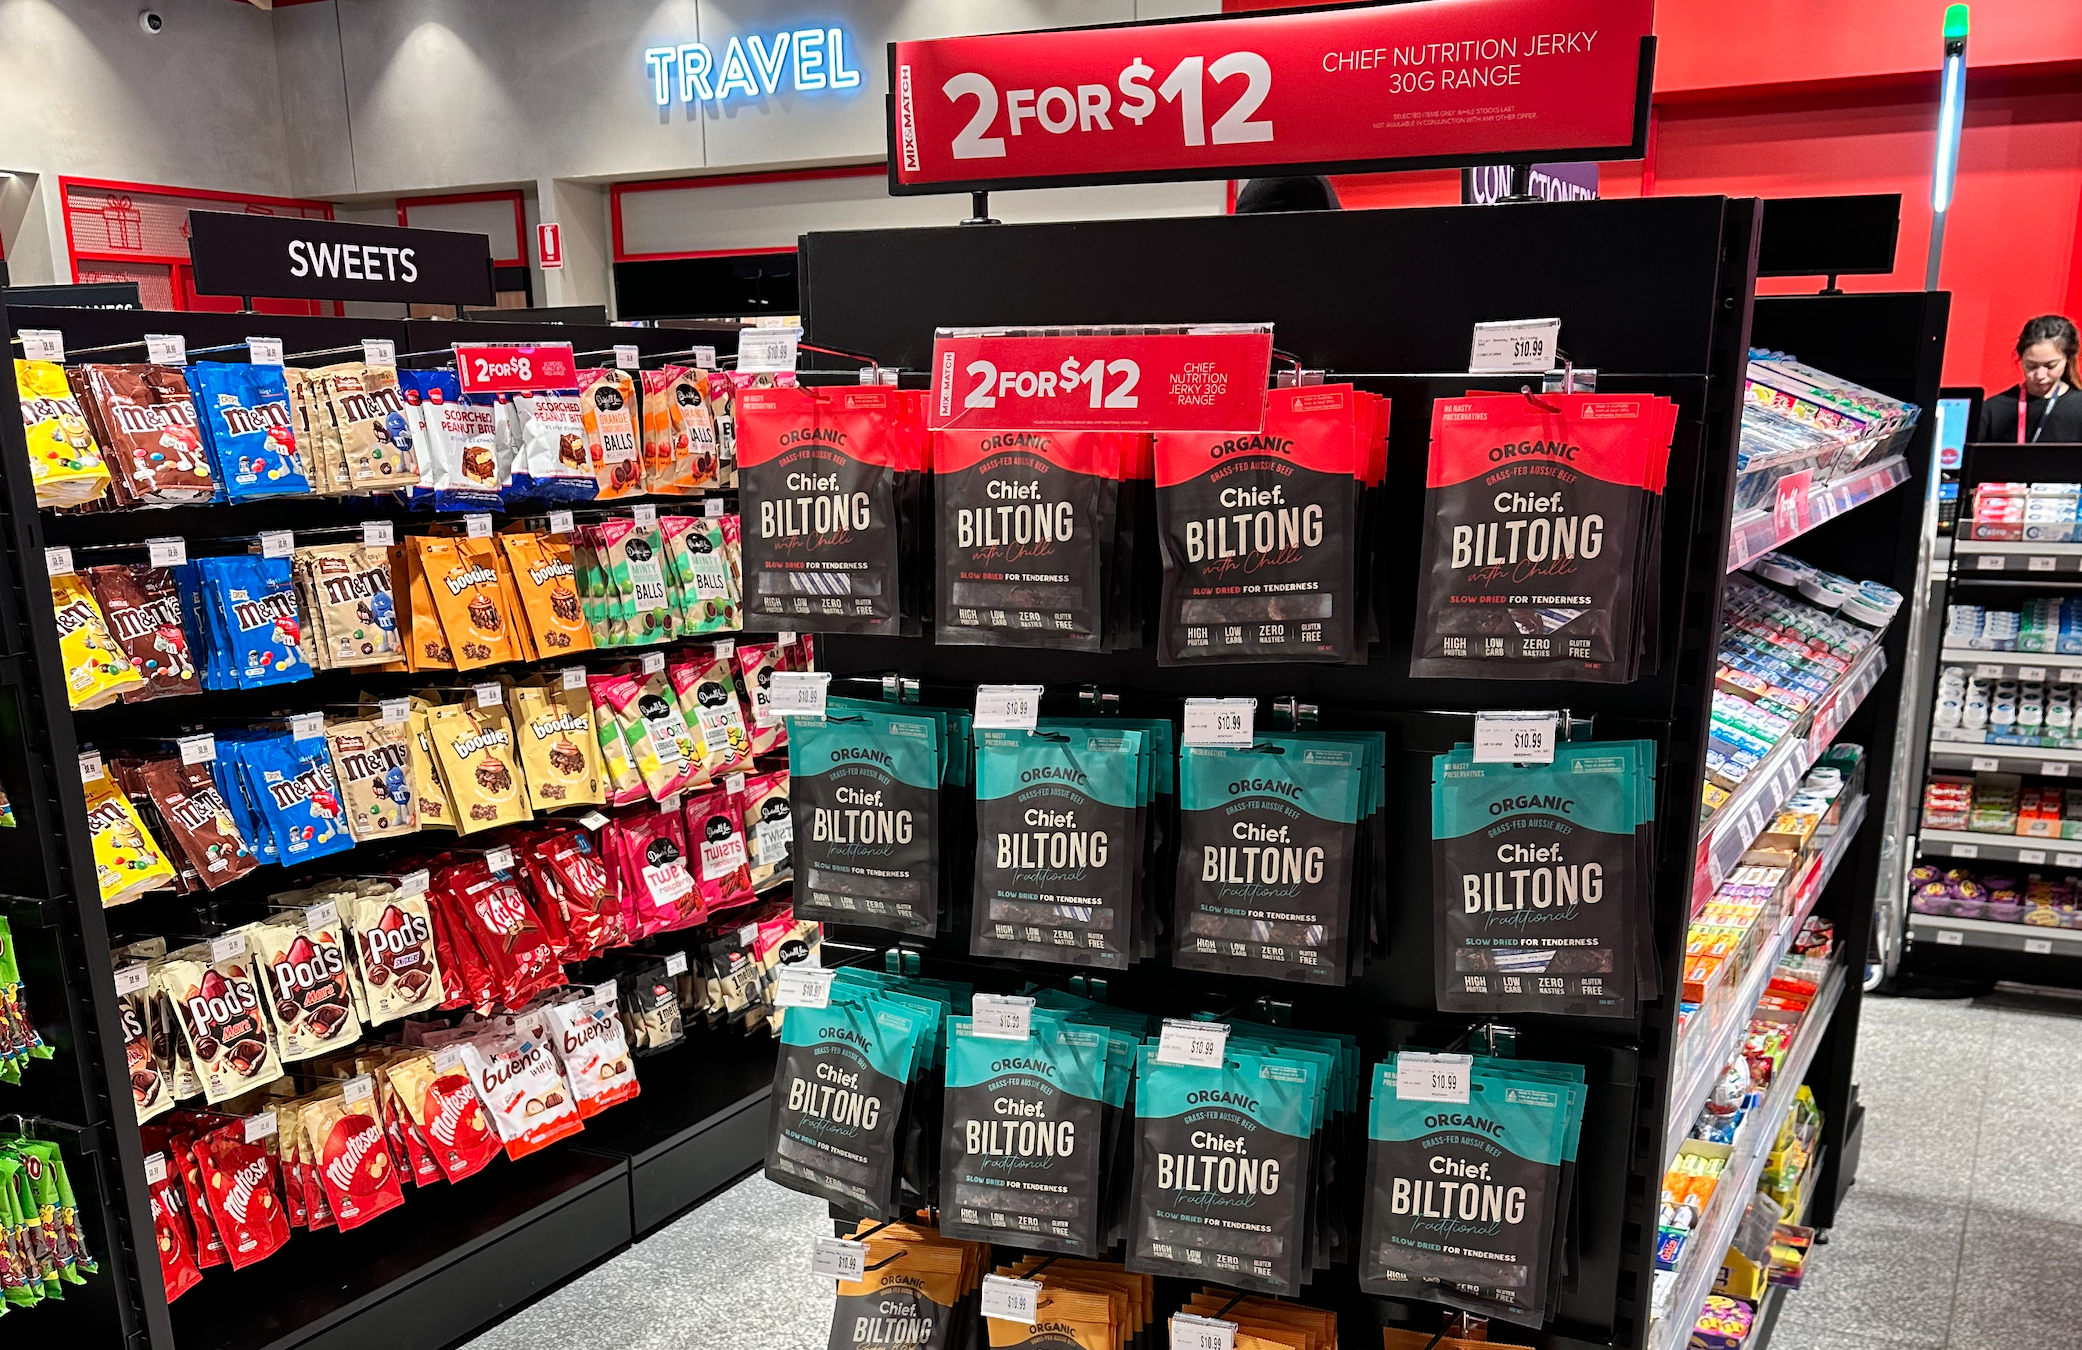 Your final boarding call just got healthier with Chief's biltong now sold at Sydney airport